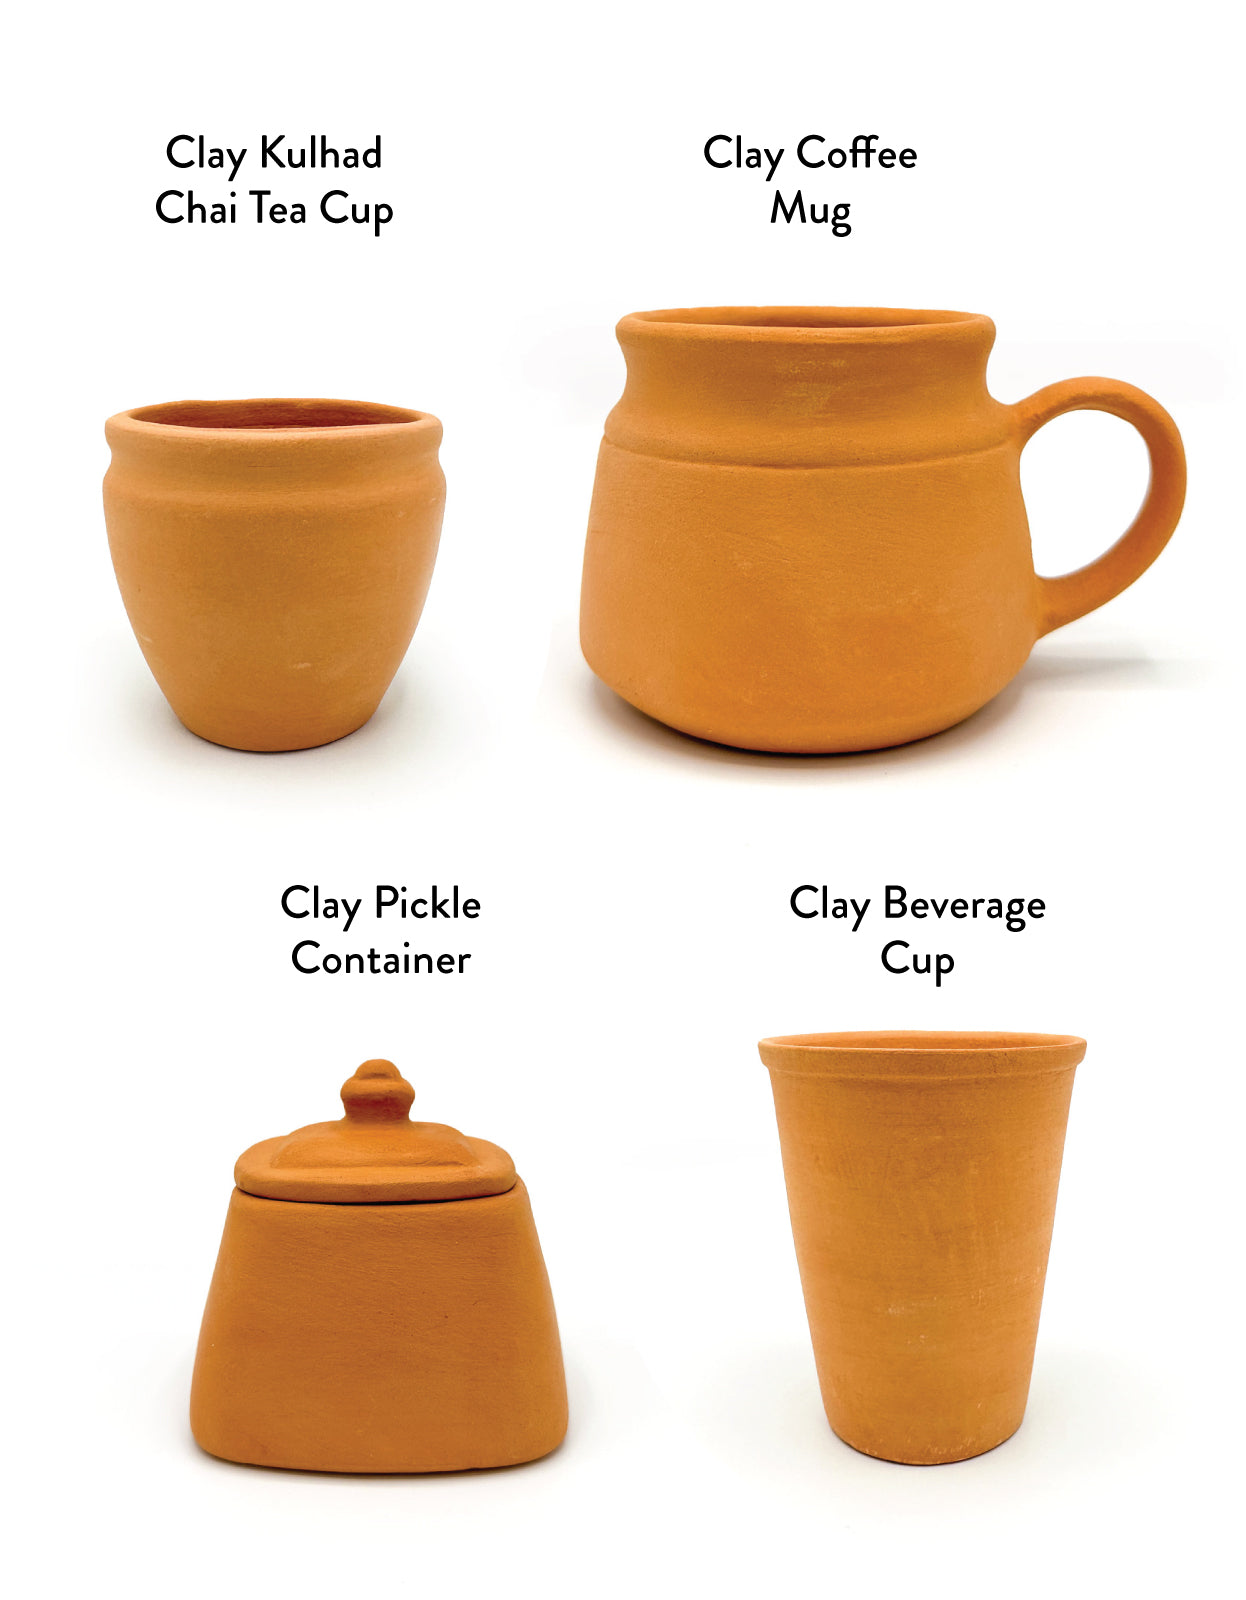 Clay Pickle Container